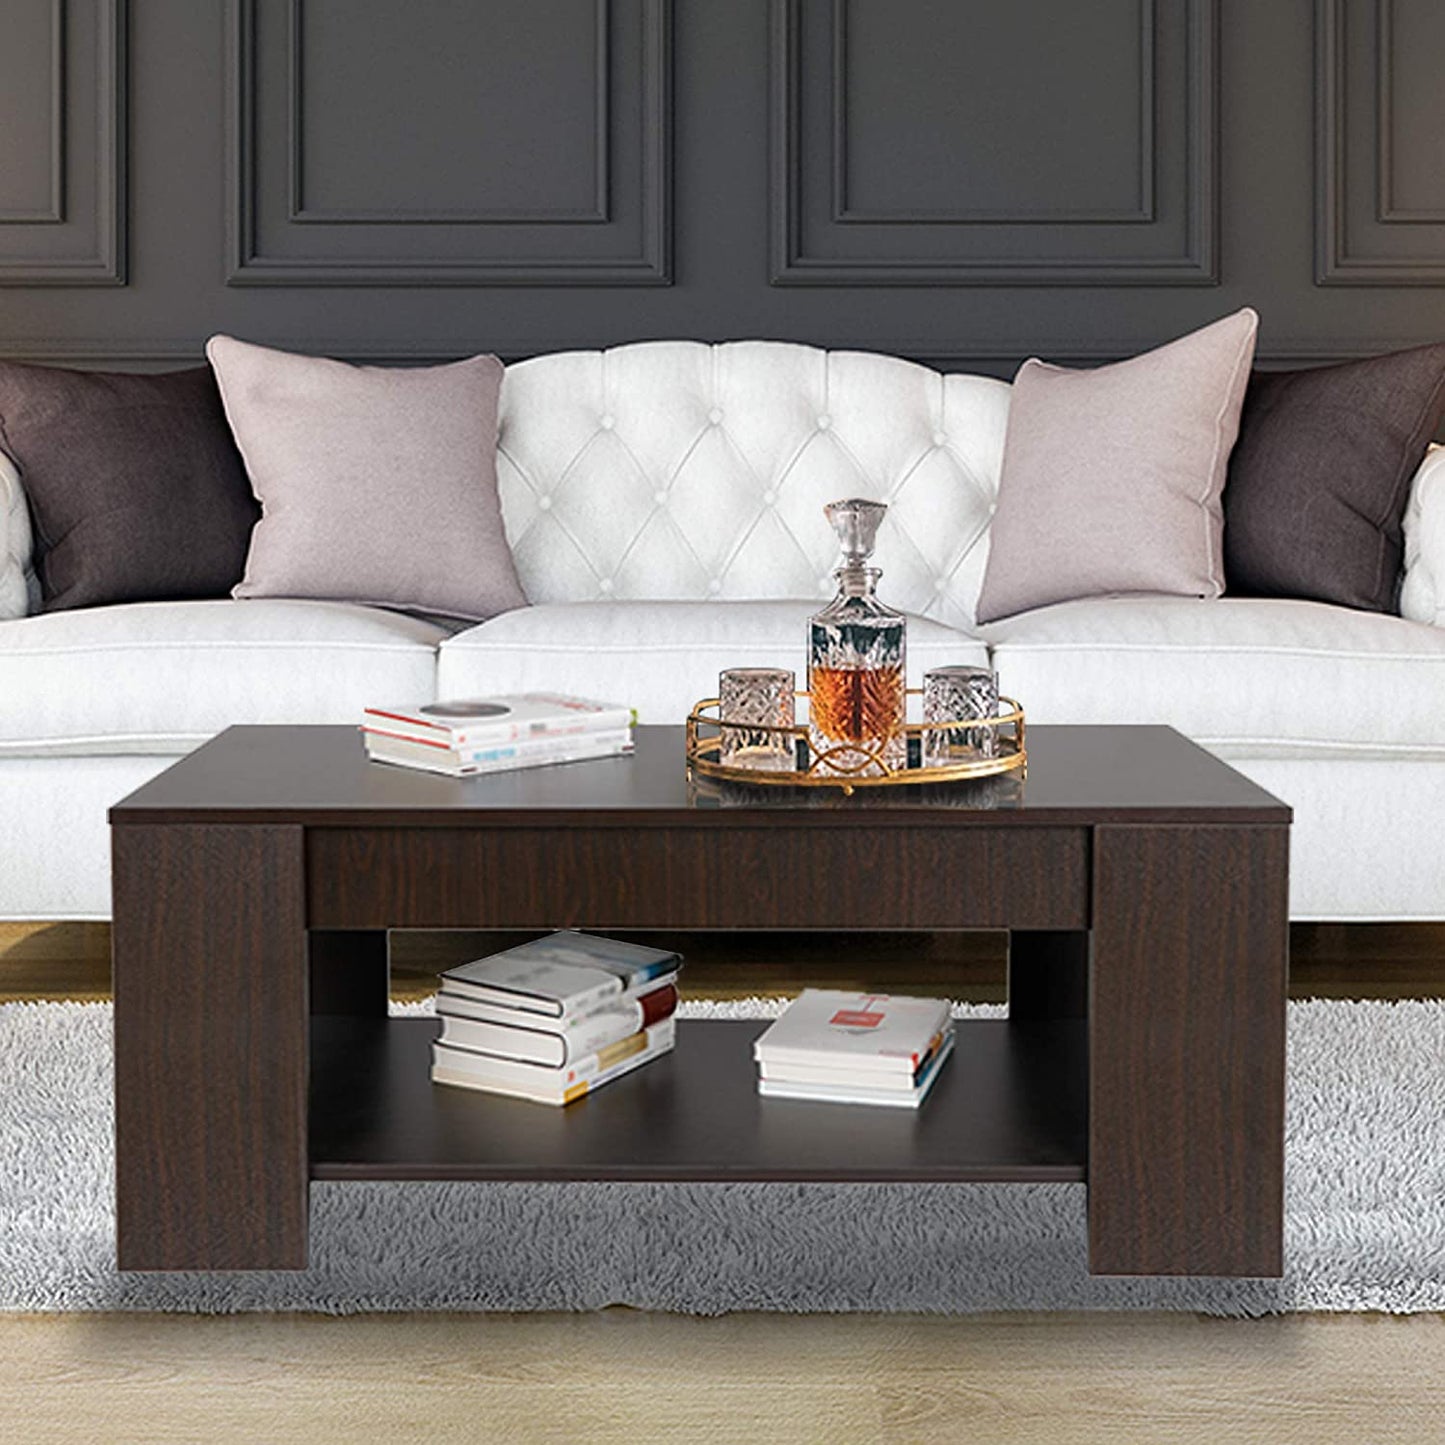 Lift Top Coffee Table with Hidden Compartment and Storage Shelves Modern Furniture for Home, Living Room, Décor